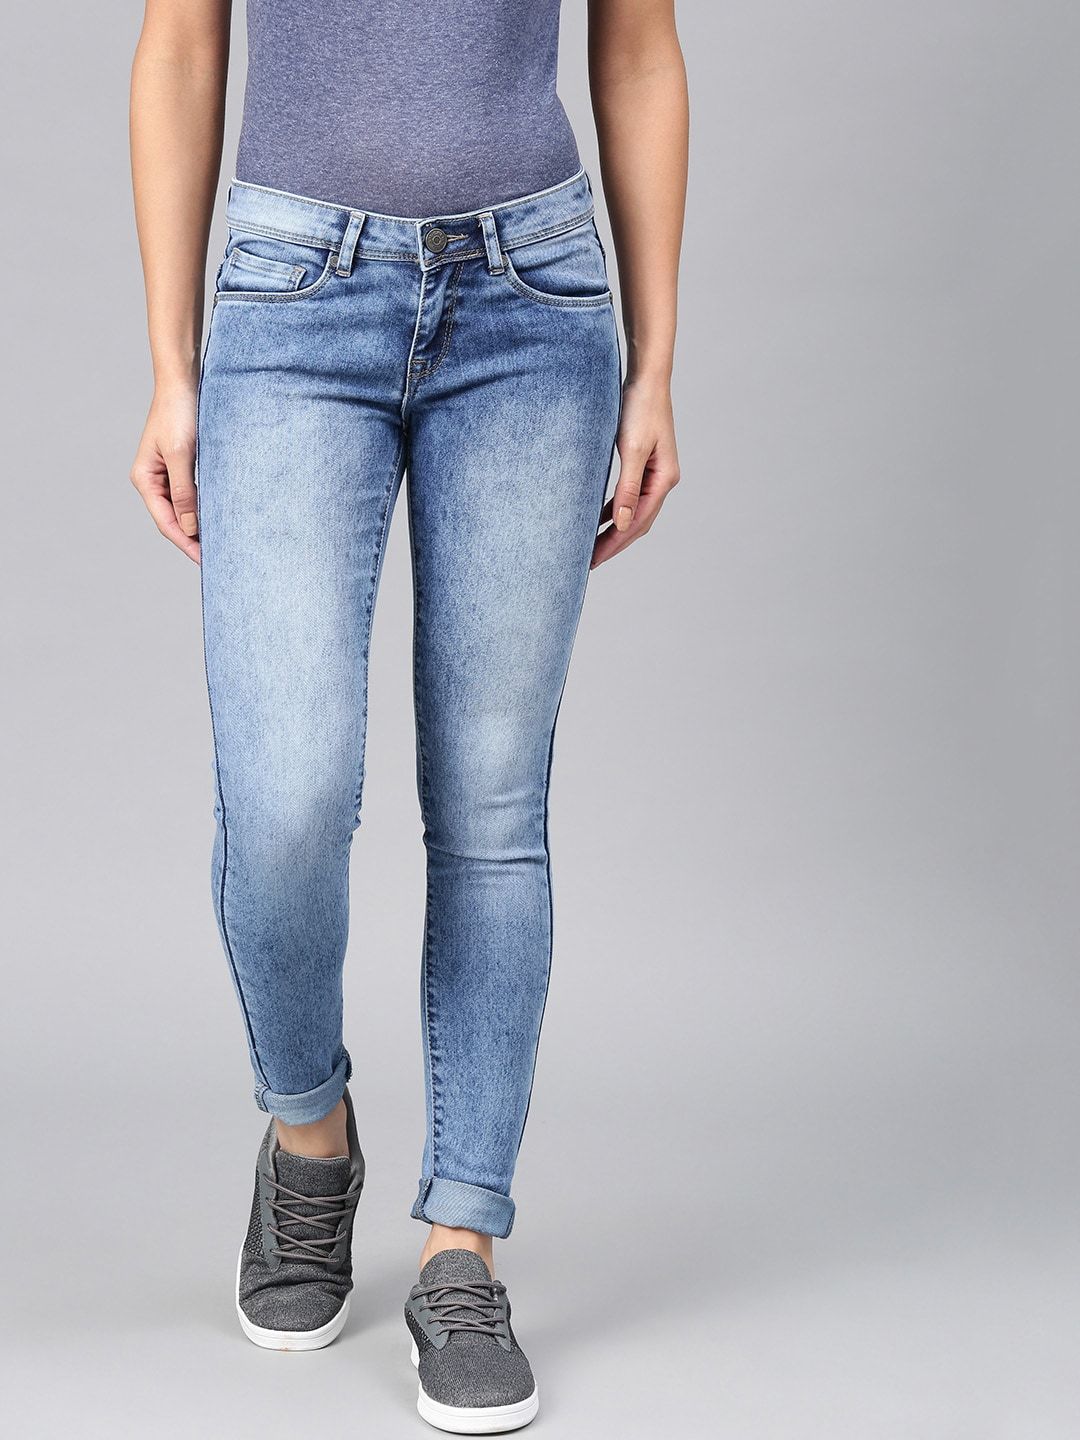 American Crew Women Blue Slim Fit Mid-Rise Clean Look Stretchable Jeans Price in India